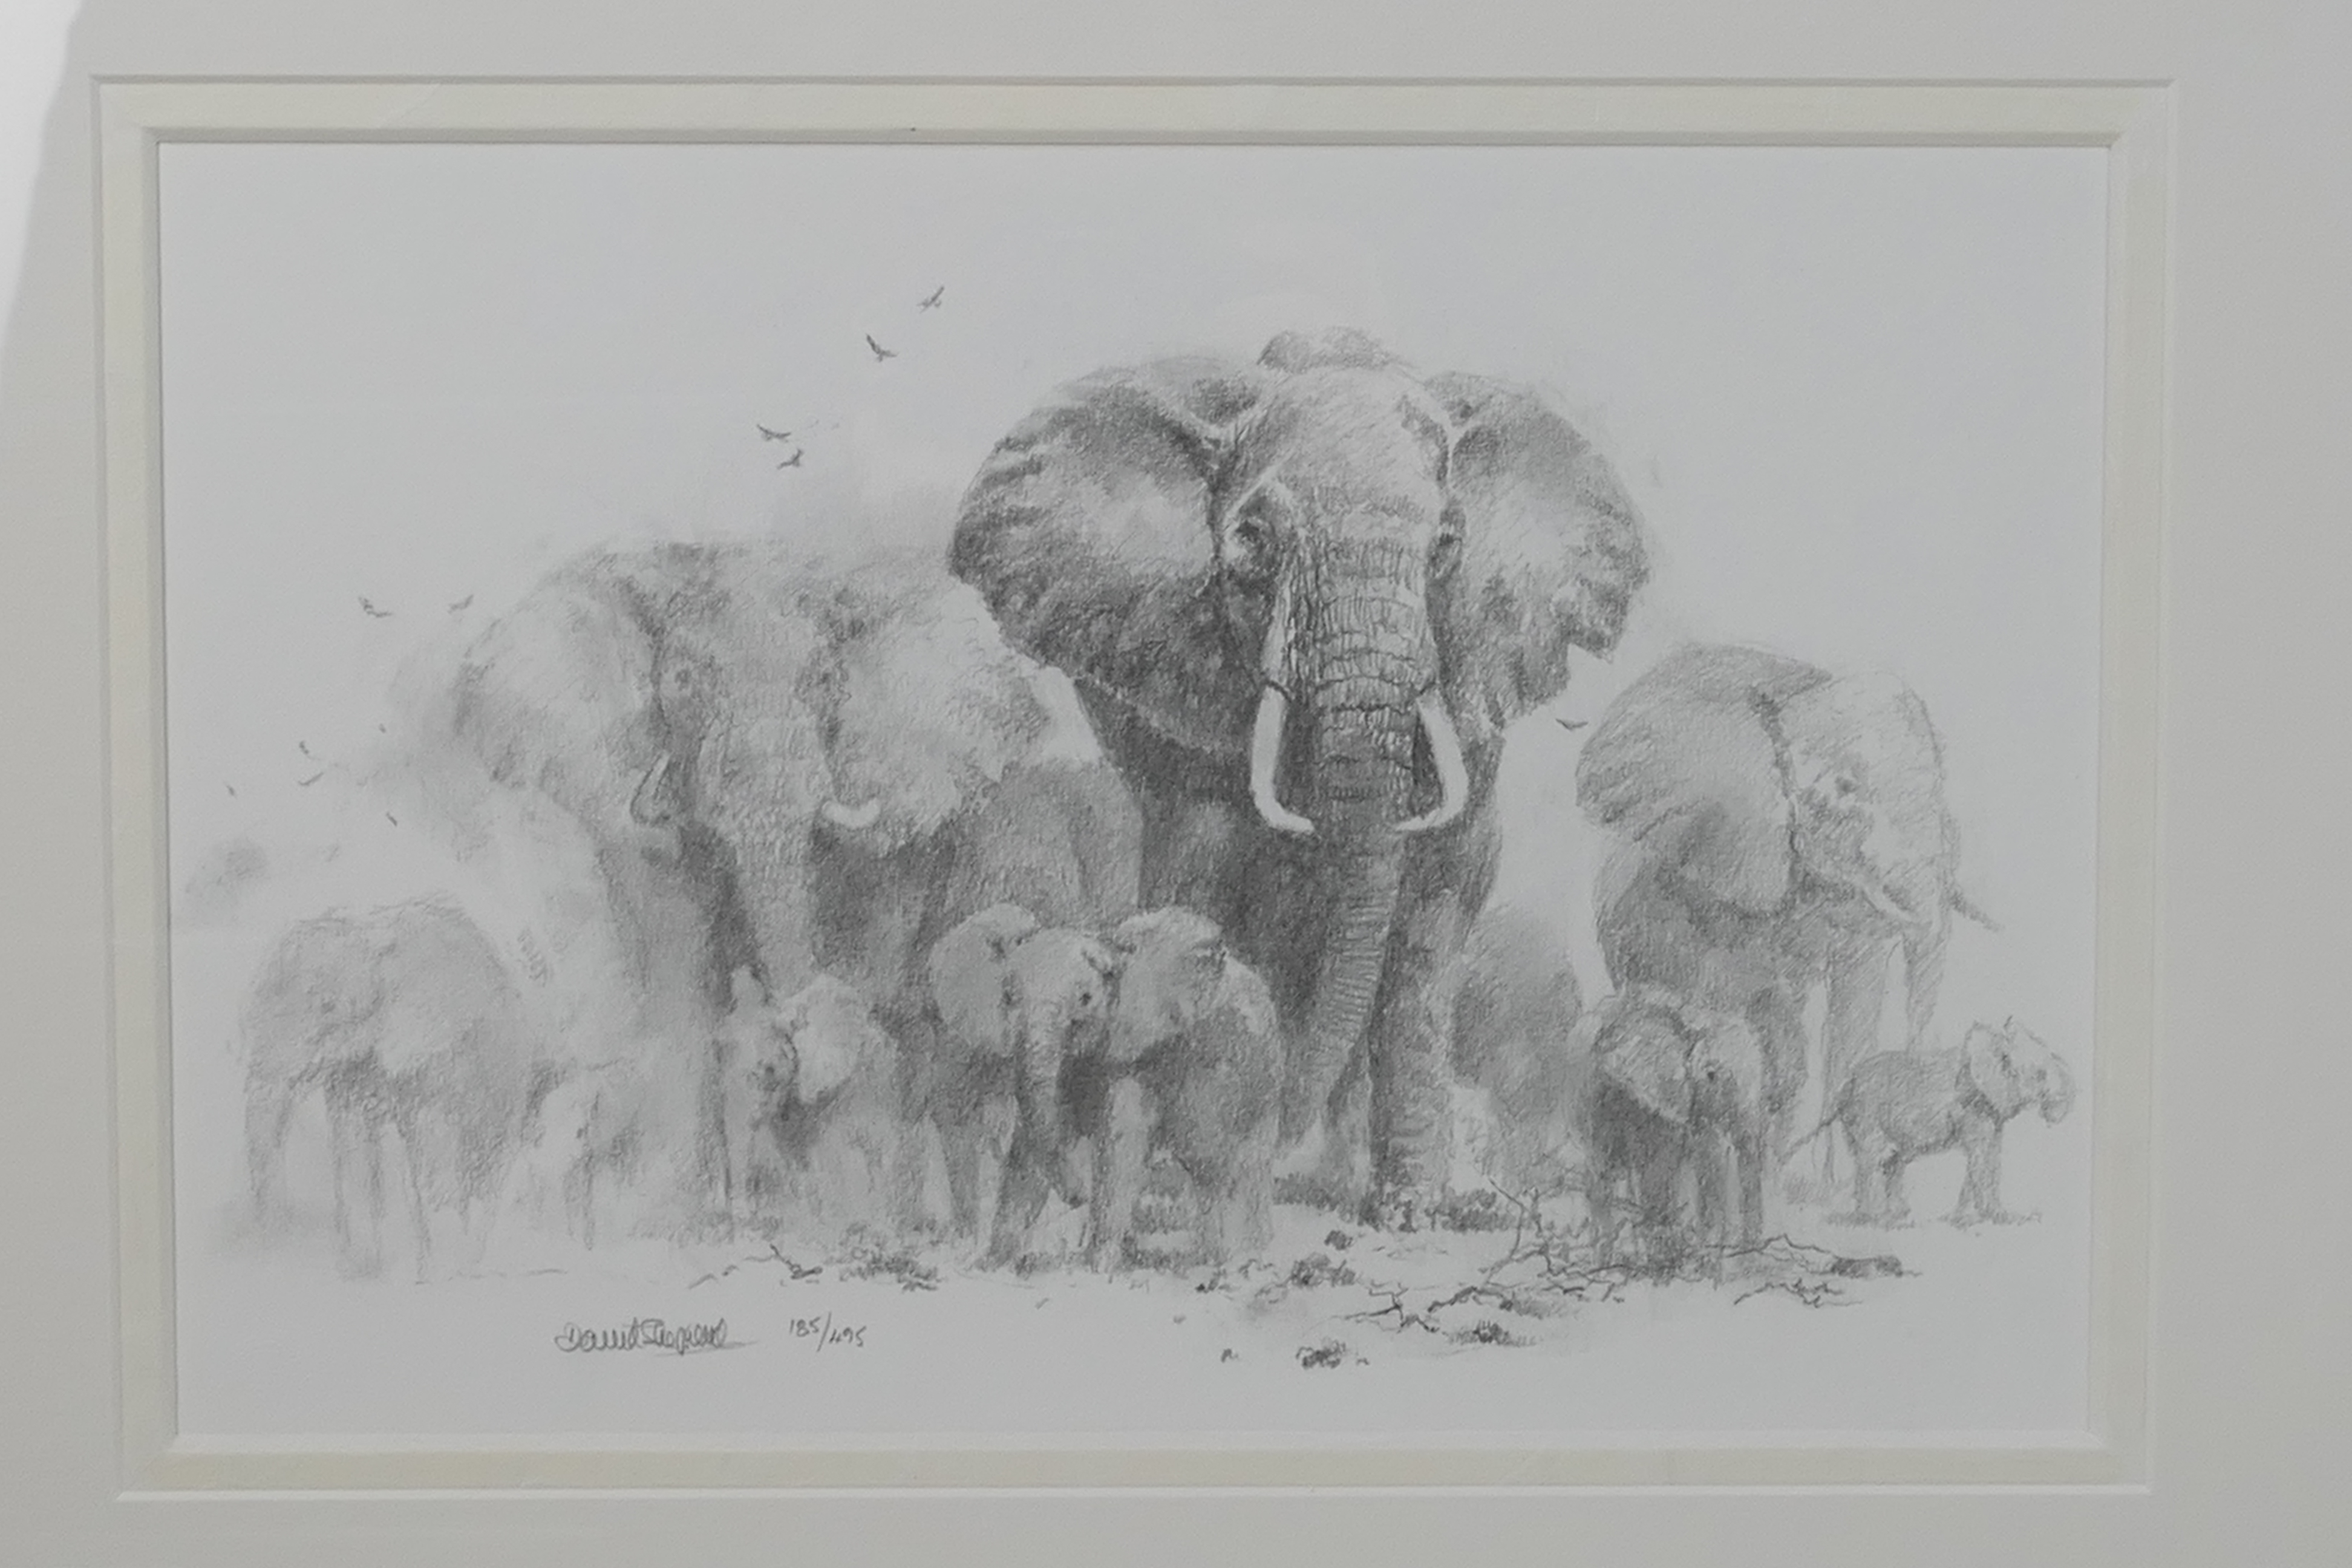 David Shepherd - A Soloman & Whitehead portfolio of four limited edition prints of pencil drawings, - Image 2 of 11